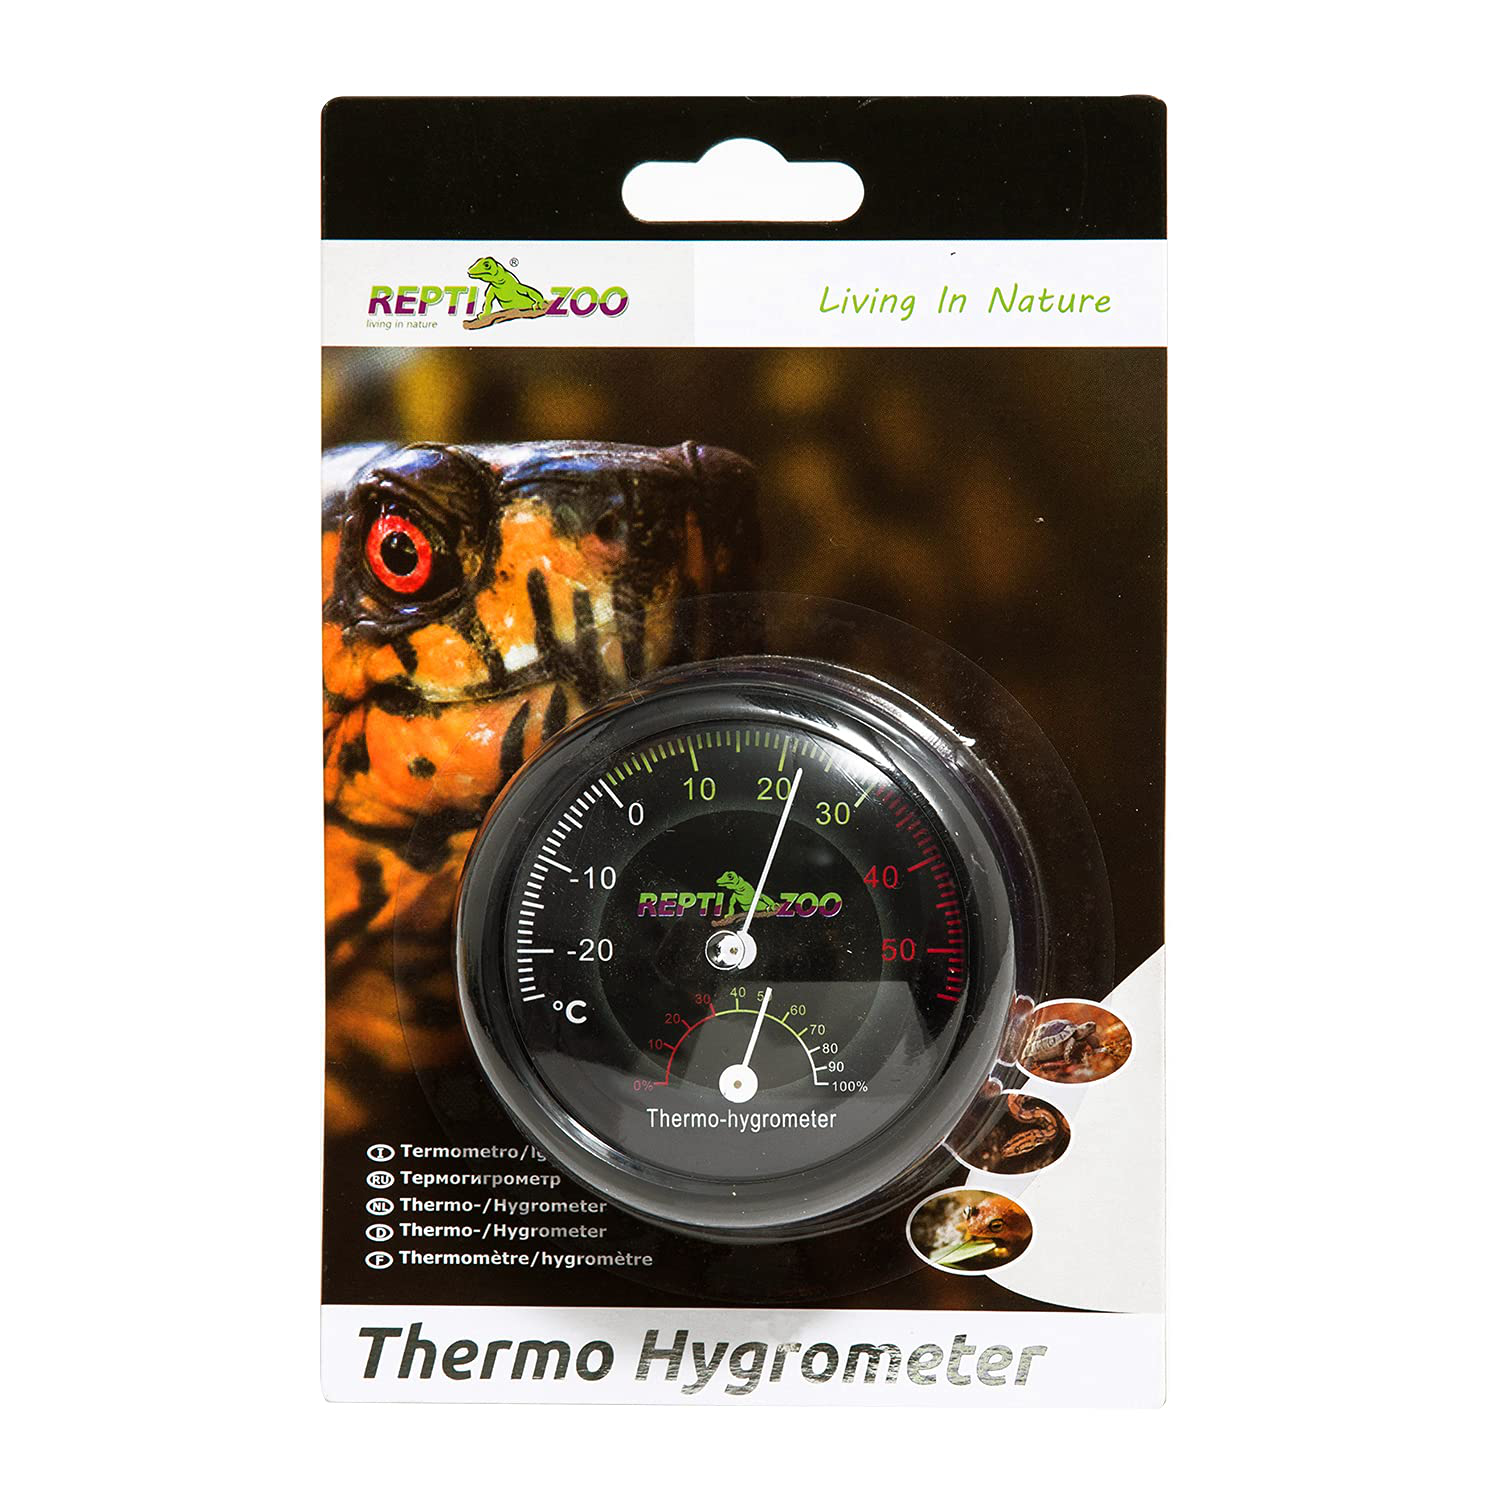 LXSZRPH Reptile Thermometer Hygrometer HD LCD Reptile Tank Digital  Thermometer with Hook Temperature Humidity Meter Gauge for Reptile Tanks